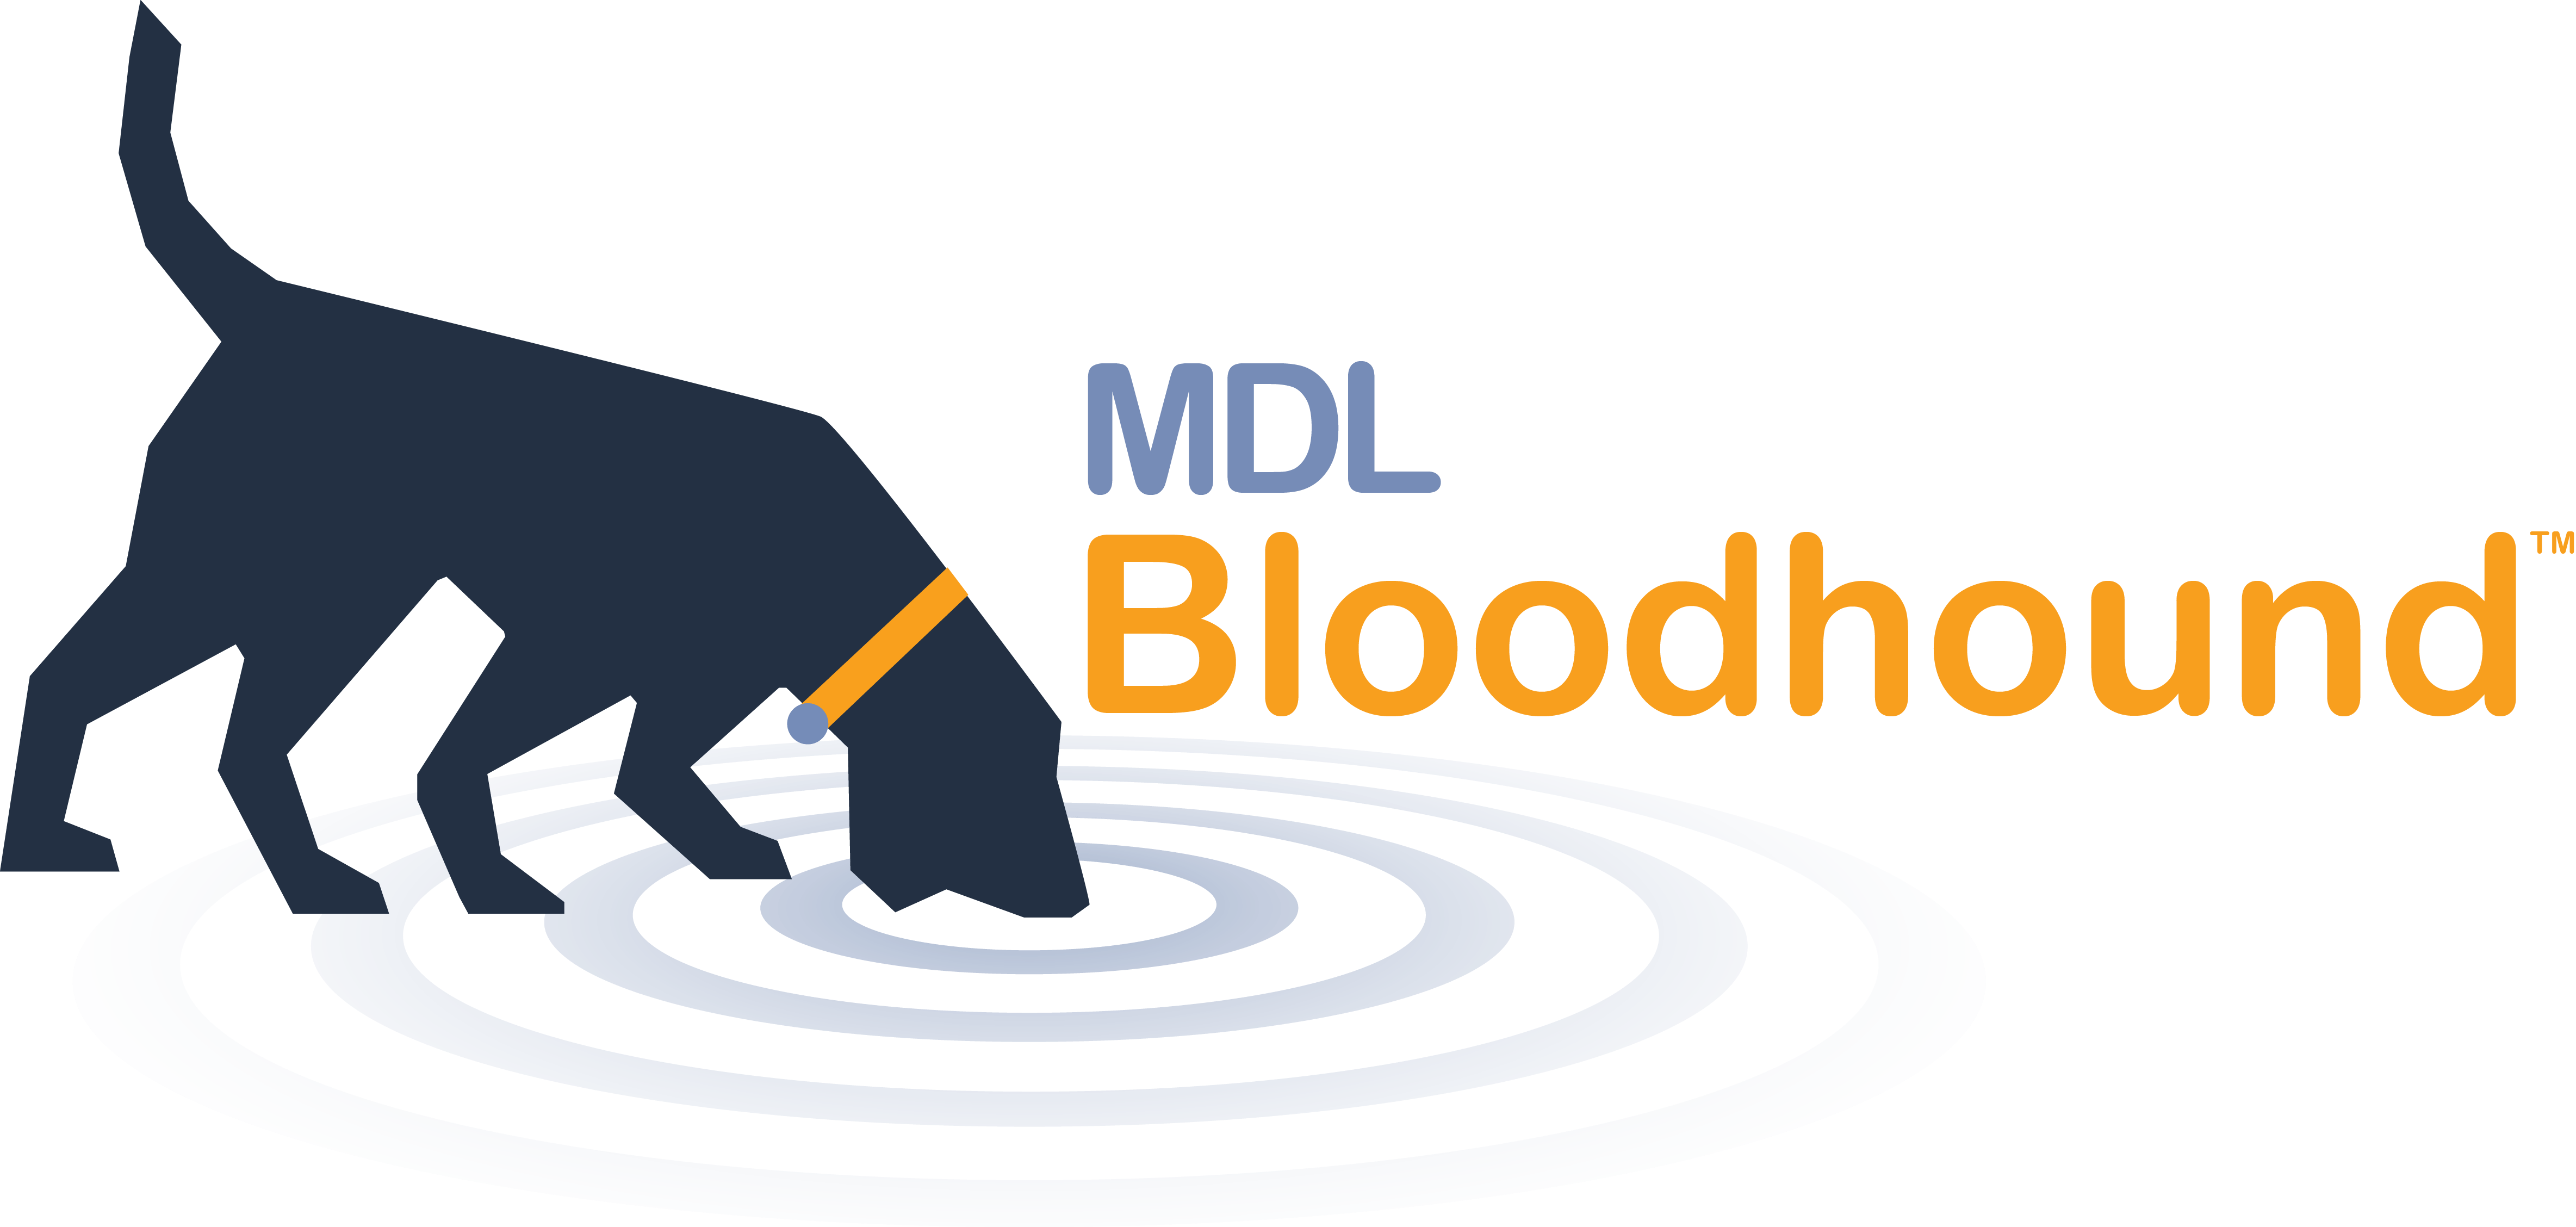 Bloodhound Logo - MDL Branding and Logo Guide - MDL autoMation